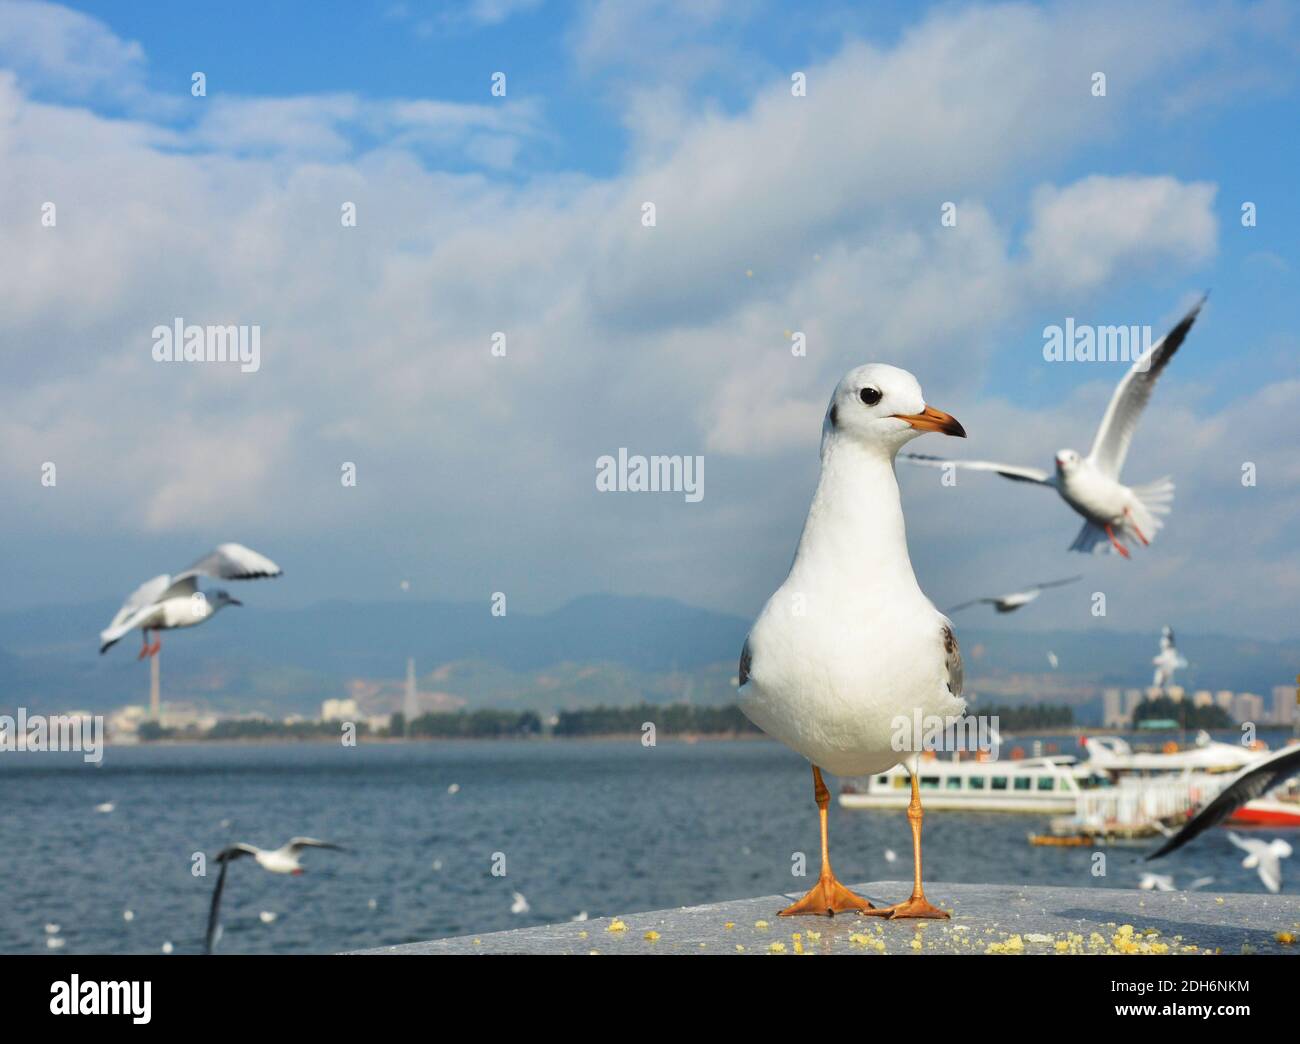 One White Larus ridibundus with orange foot and mouth standing on the platform Stock Photo